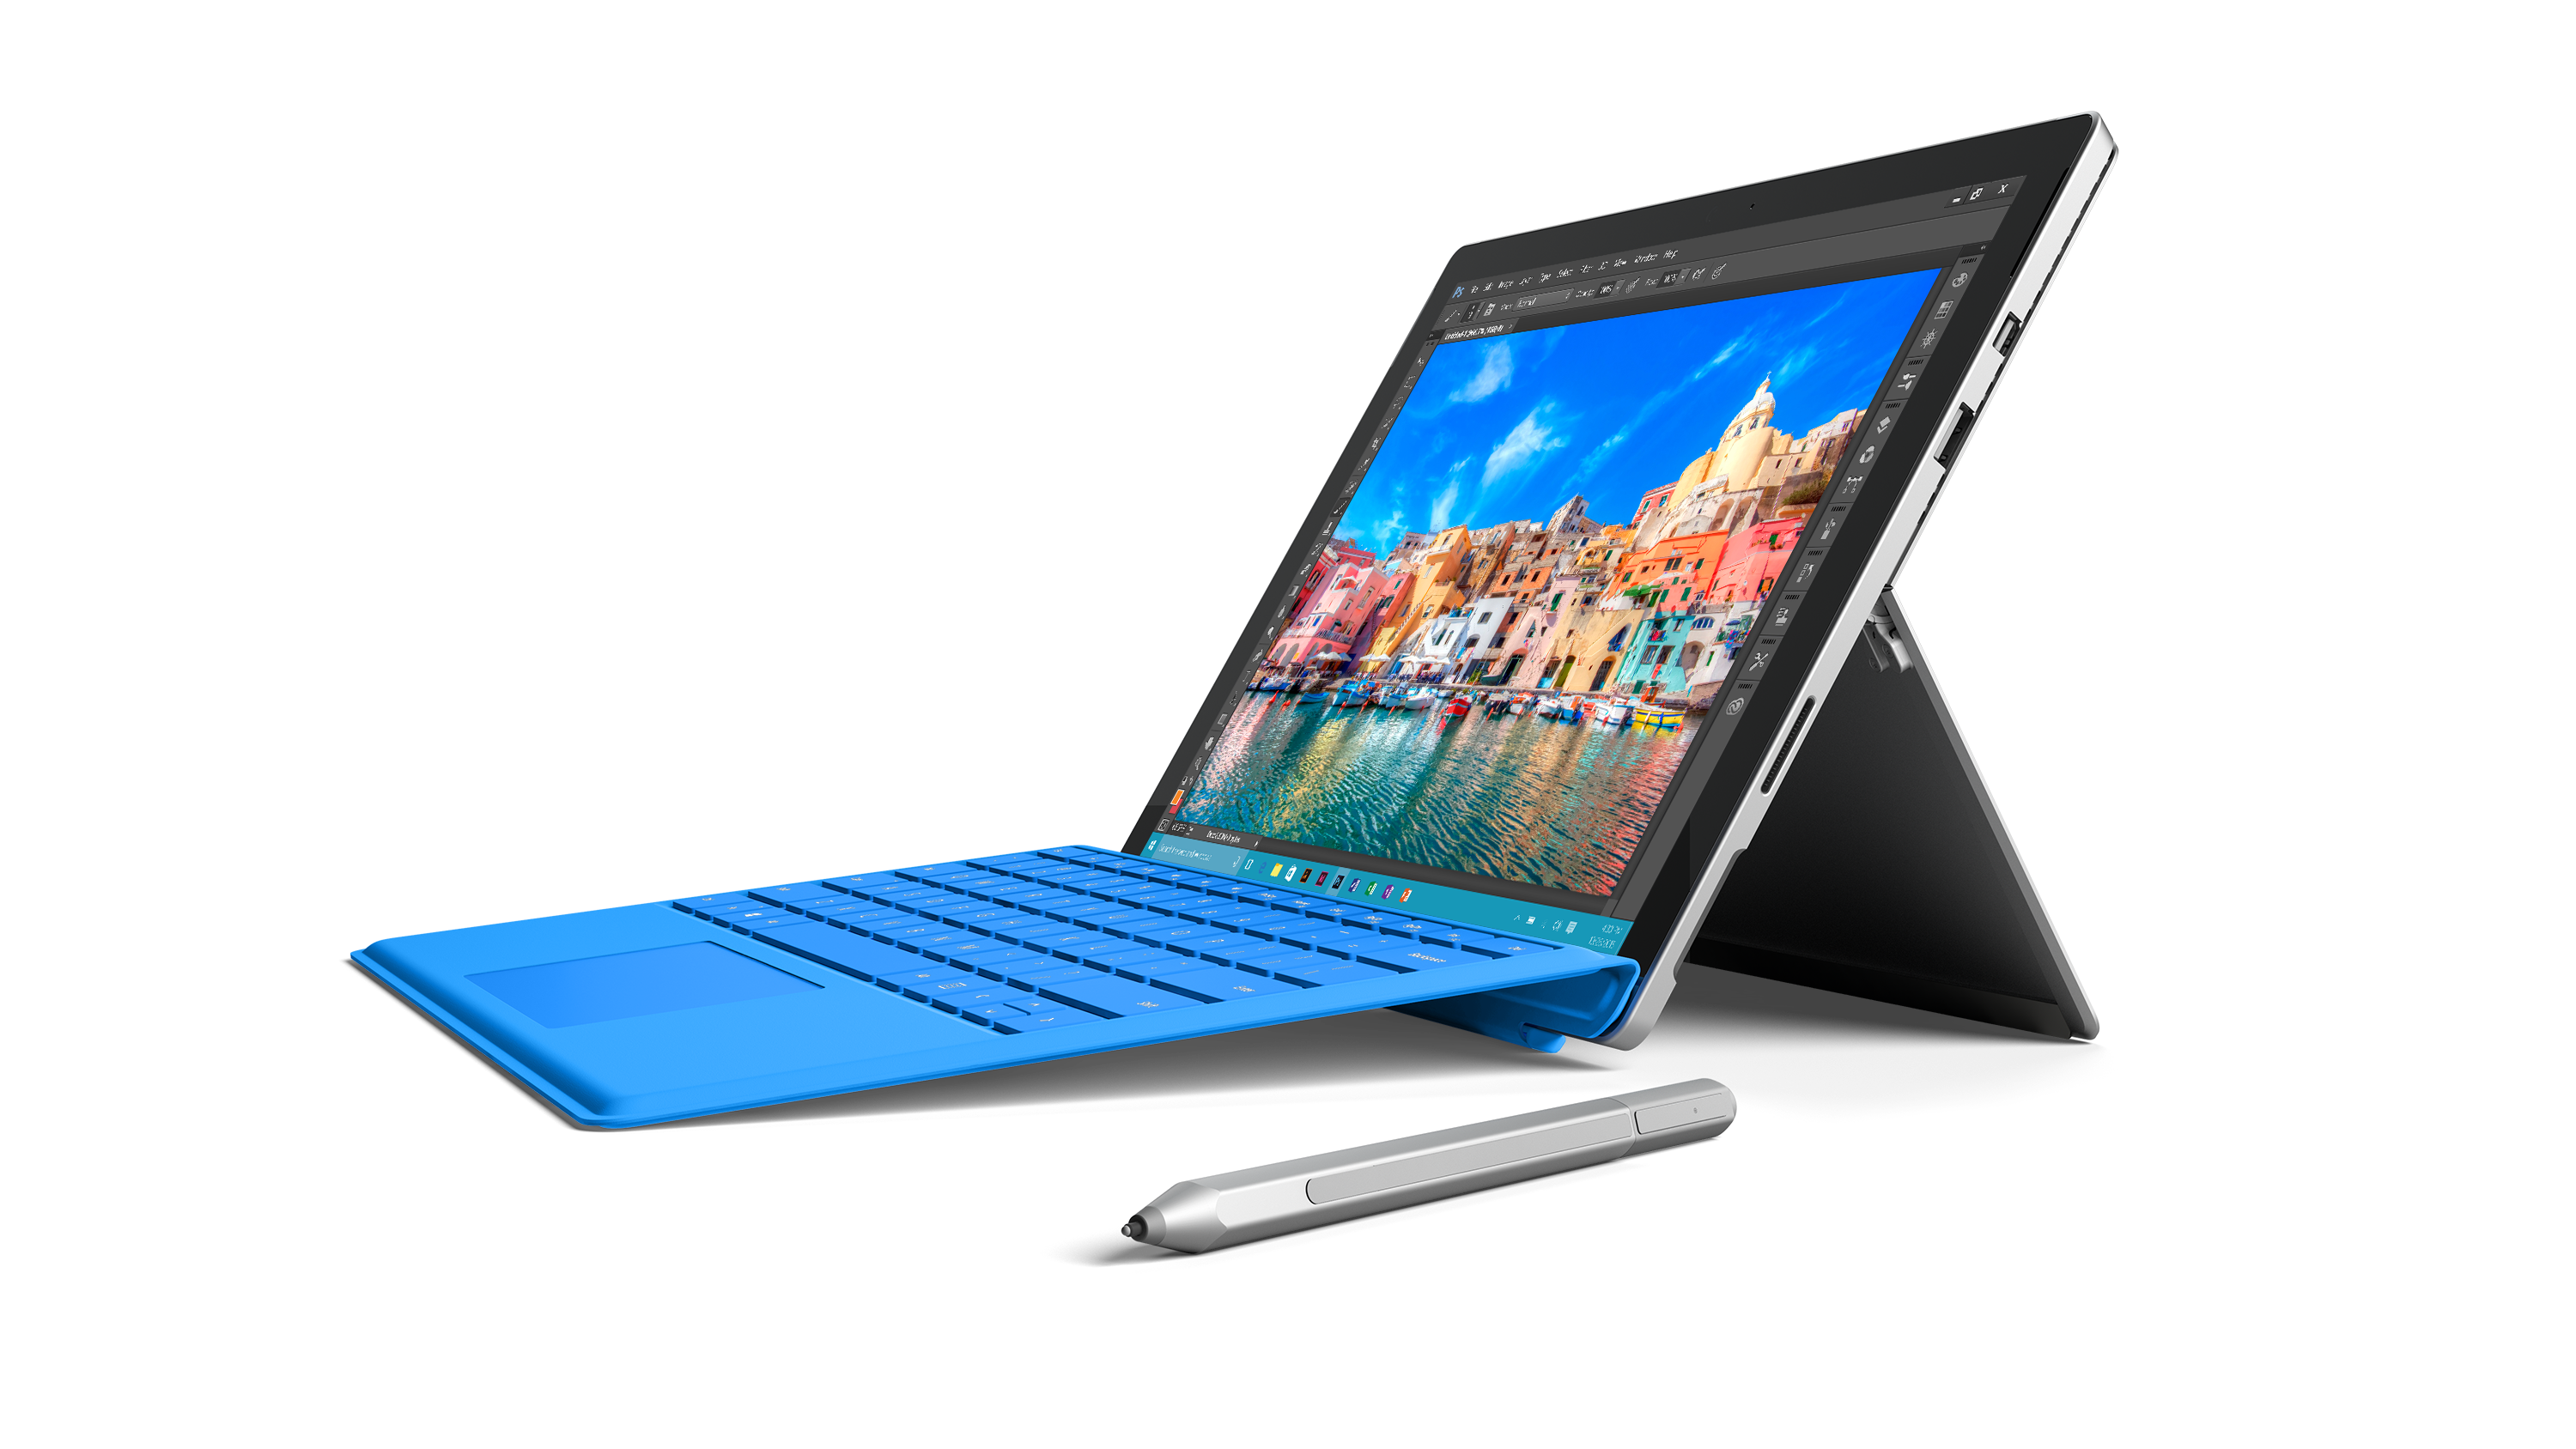 Microsoft debuts more powerful models of Surface Pro 4 and Surface Book